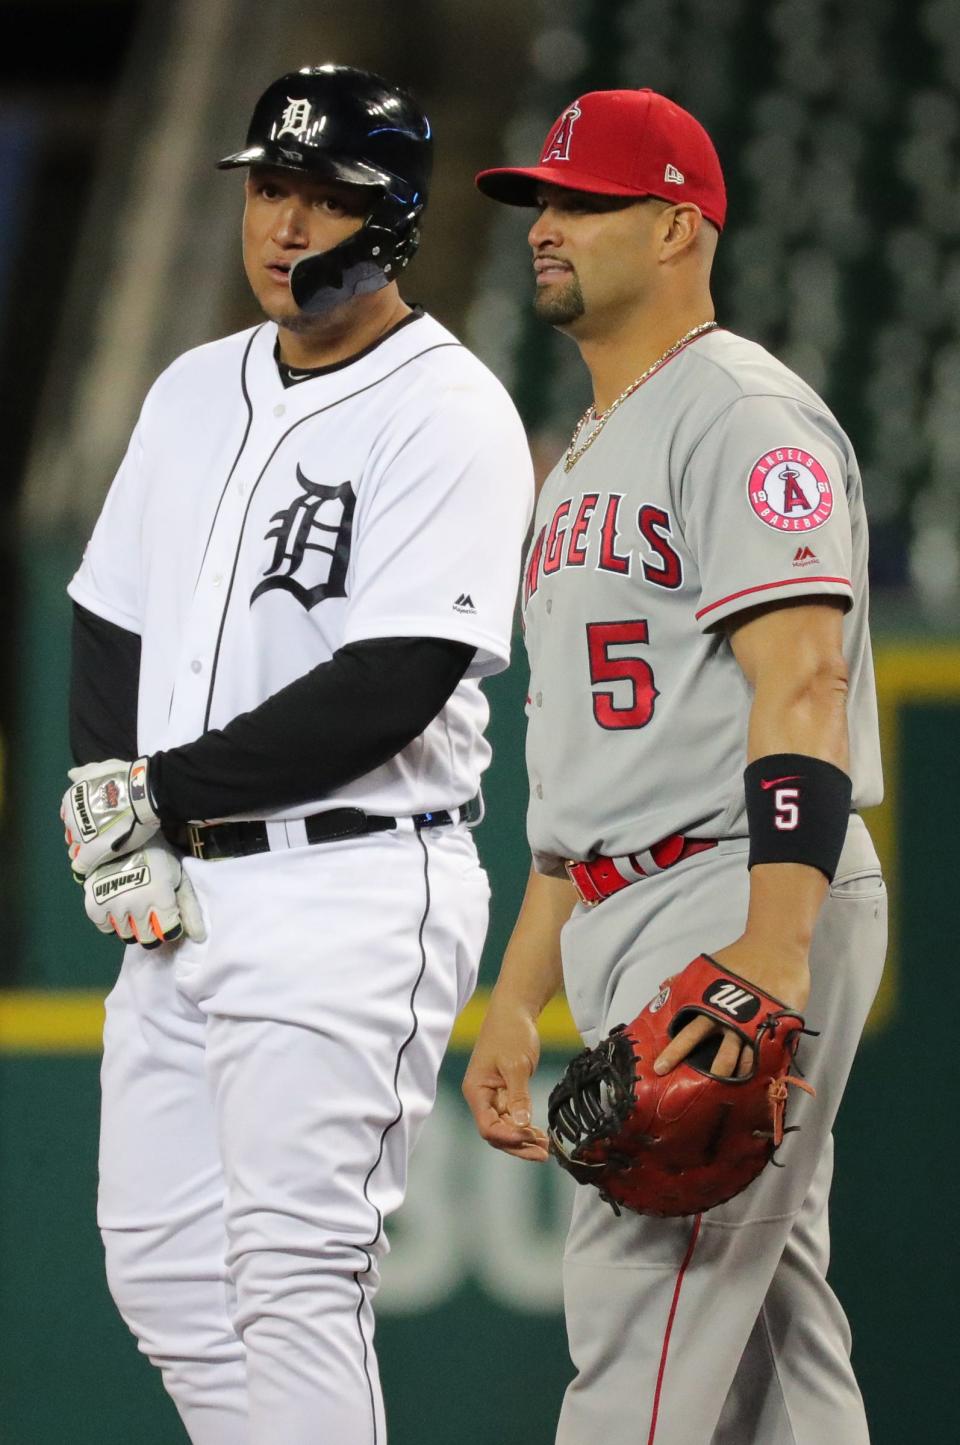 Angels first baseman Albert Pujols talks with Tigers DH Miguel Cabrera on May 7, 2019 at Comerica Park in Detroit